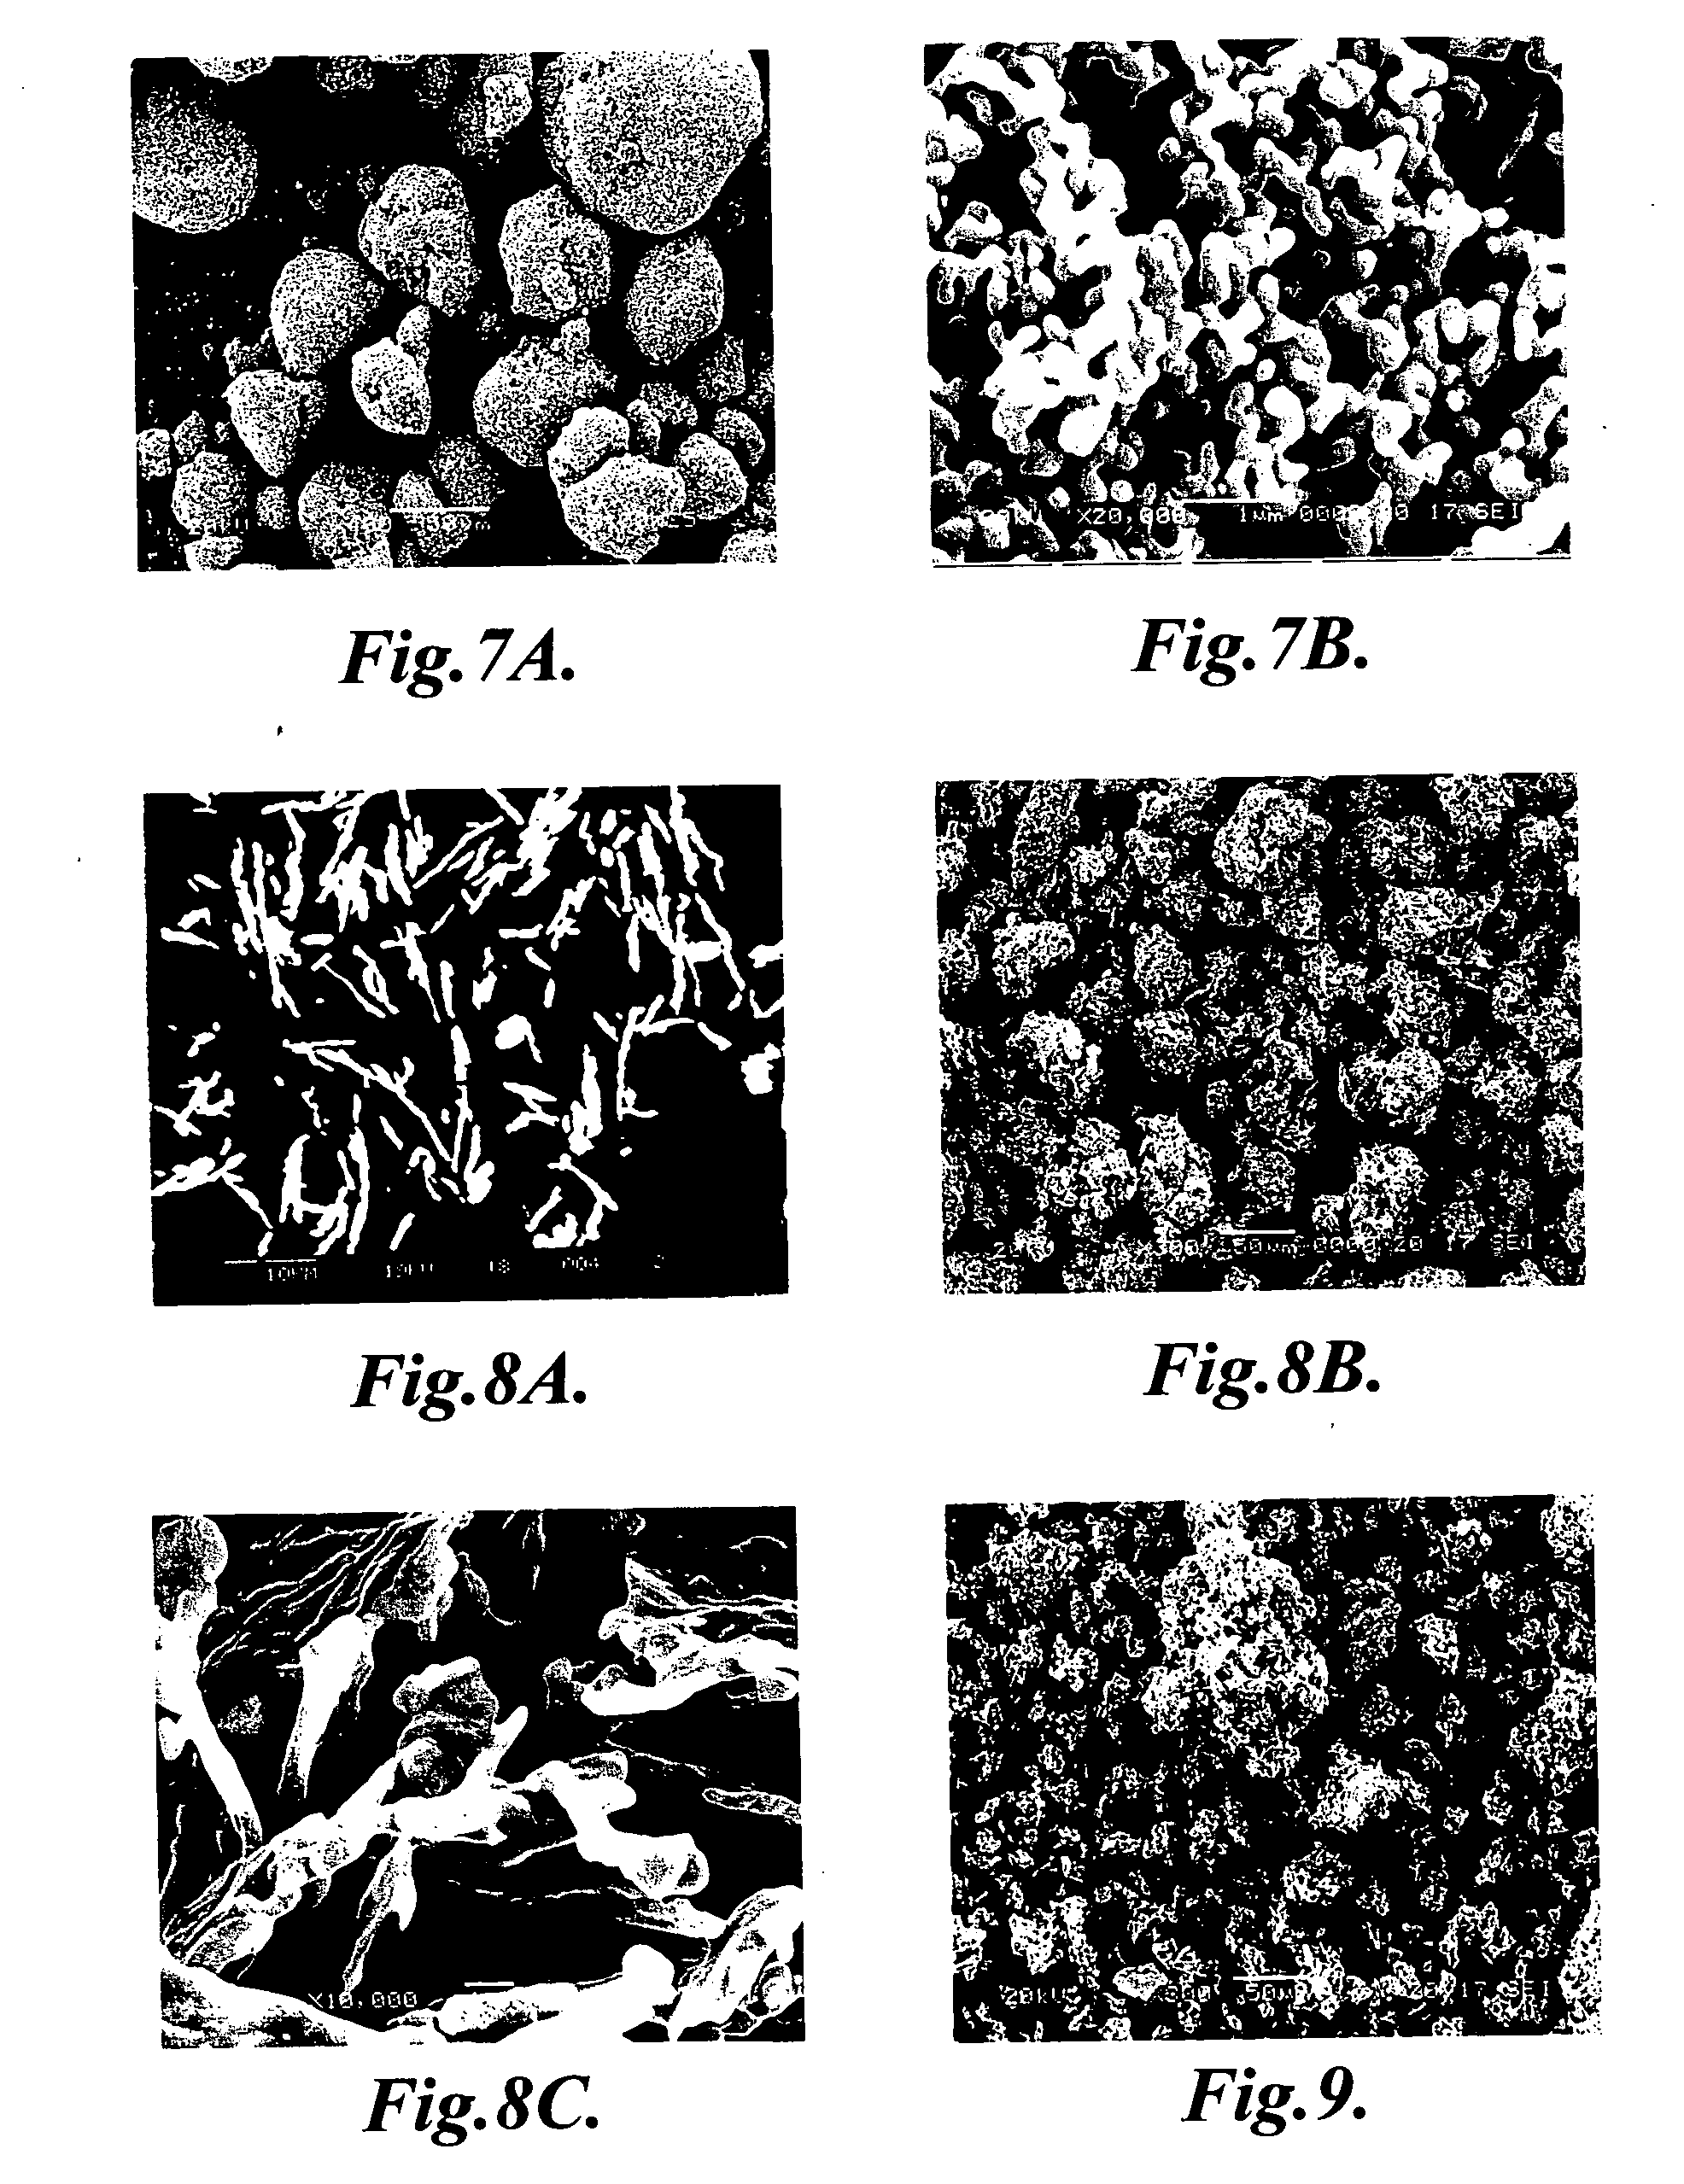 Methods for spherically granulating and agglomerating metal particles, and the metal particles prepared thereby, anodes made from the metal particles